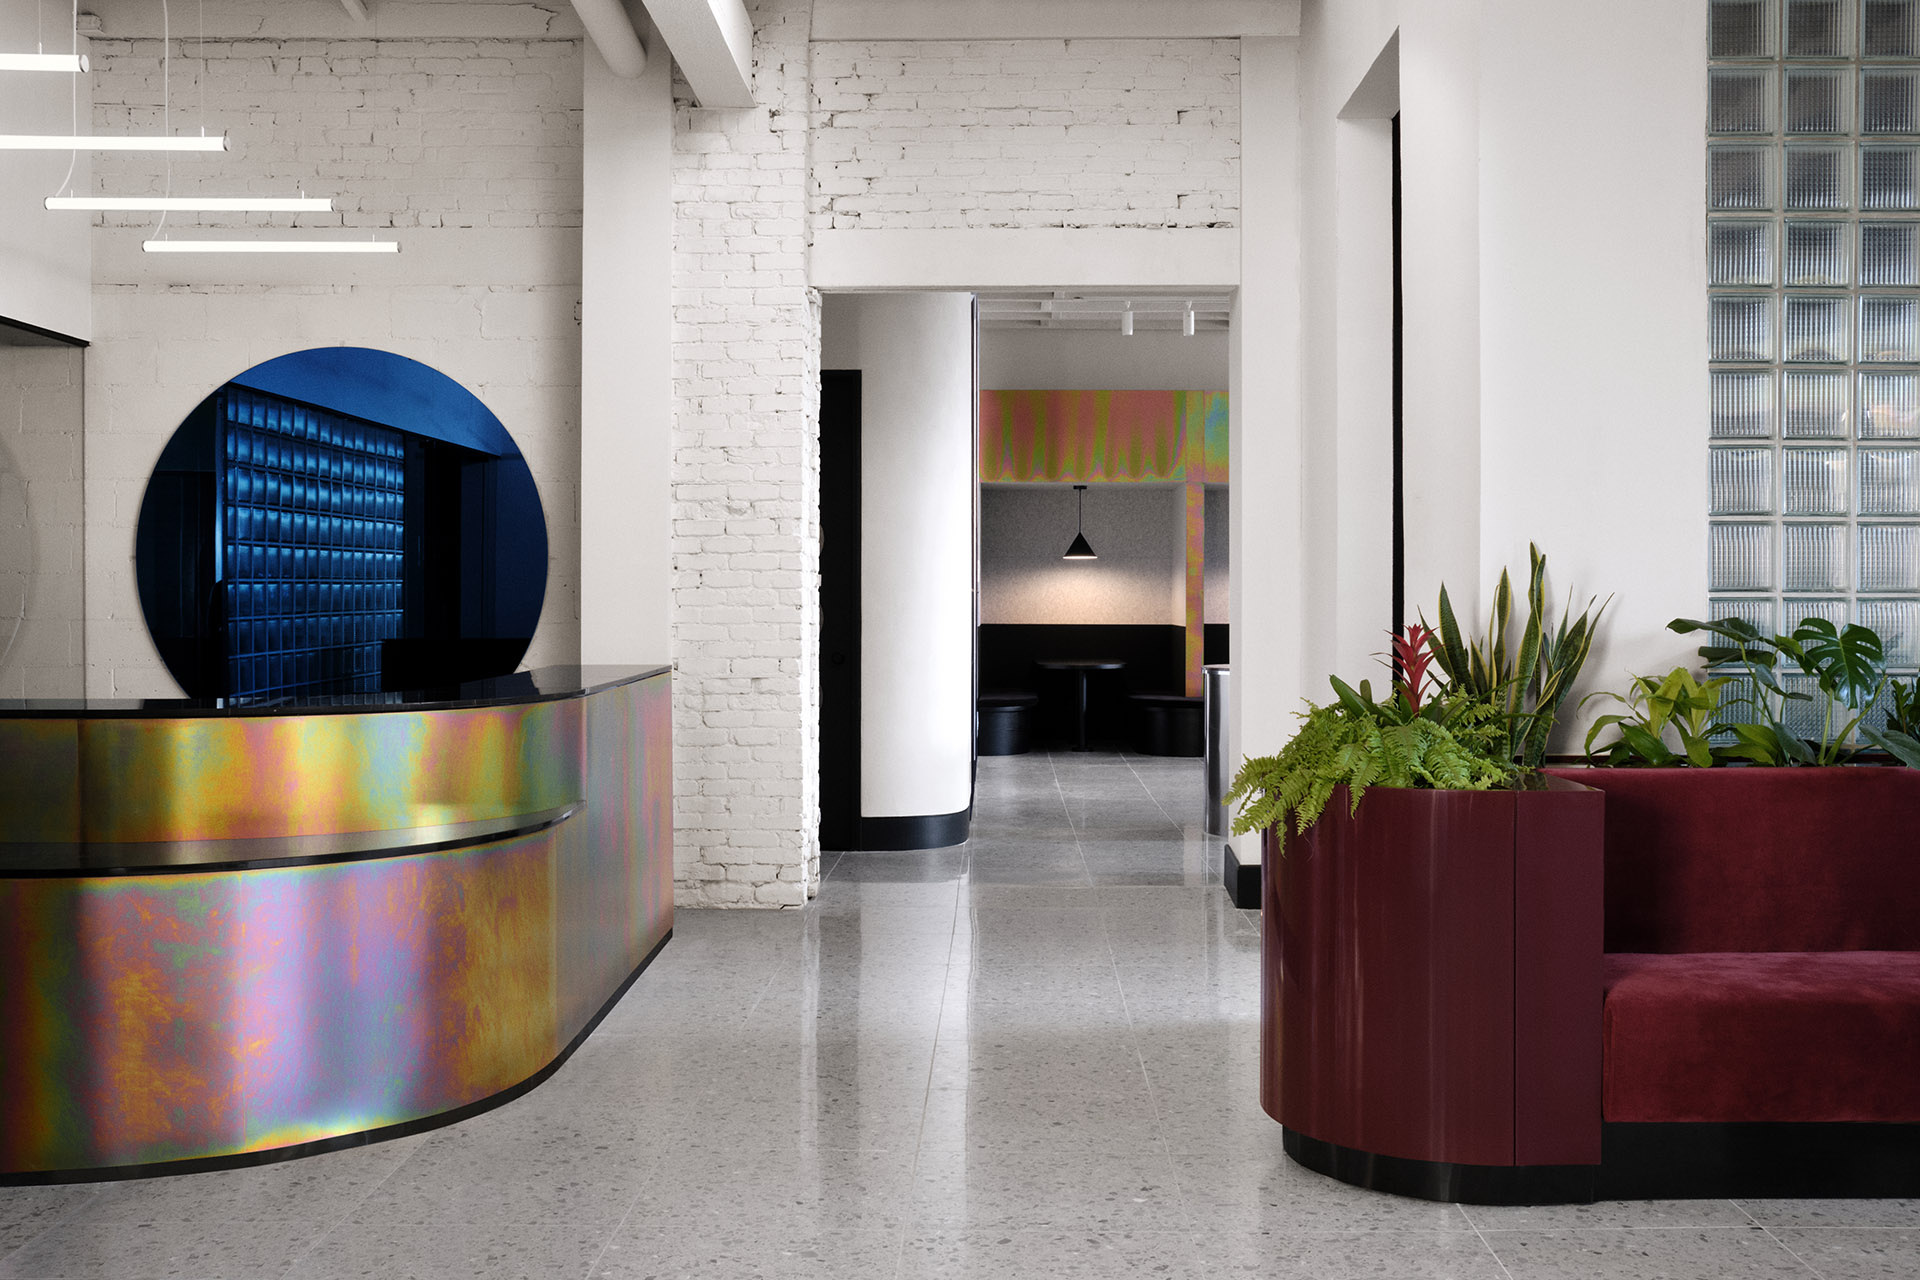 Spacial, a colorful and stylish workspace that emphasizes light as the focus of workspaces